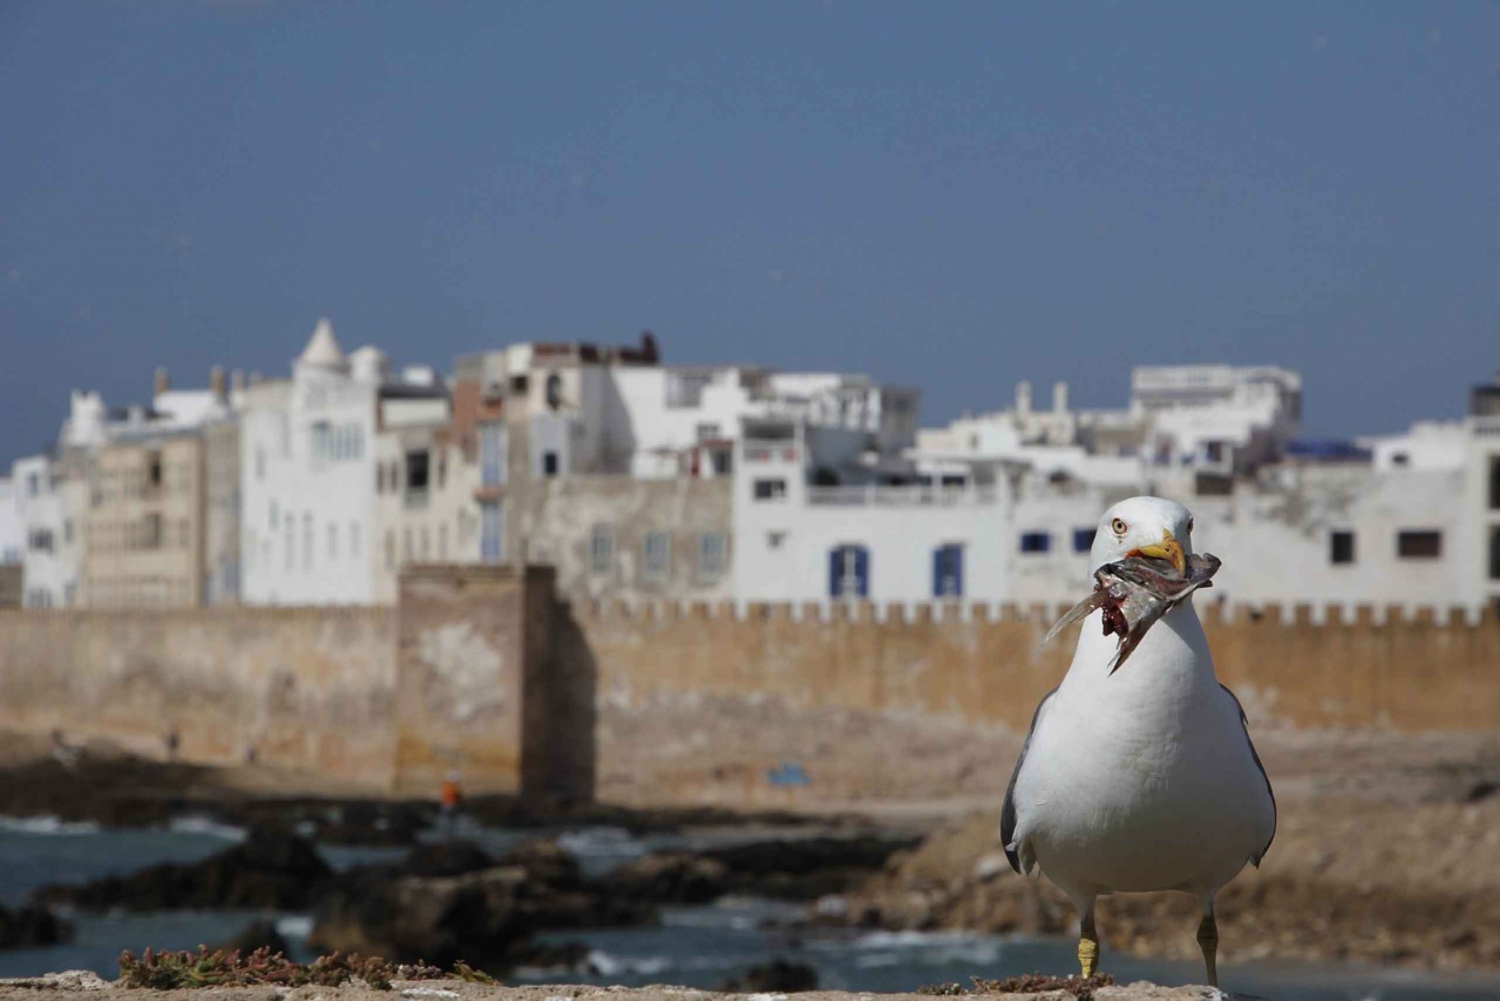 One Day Trip from Marrakech To Essaouira